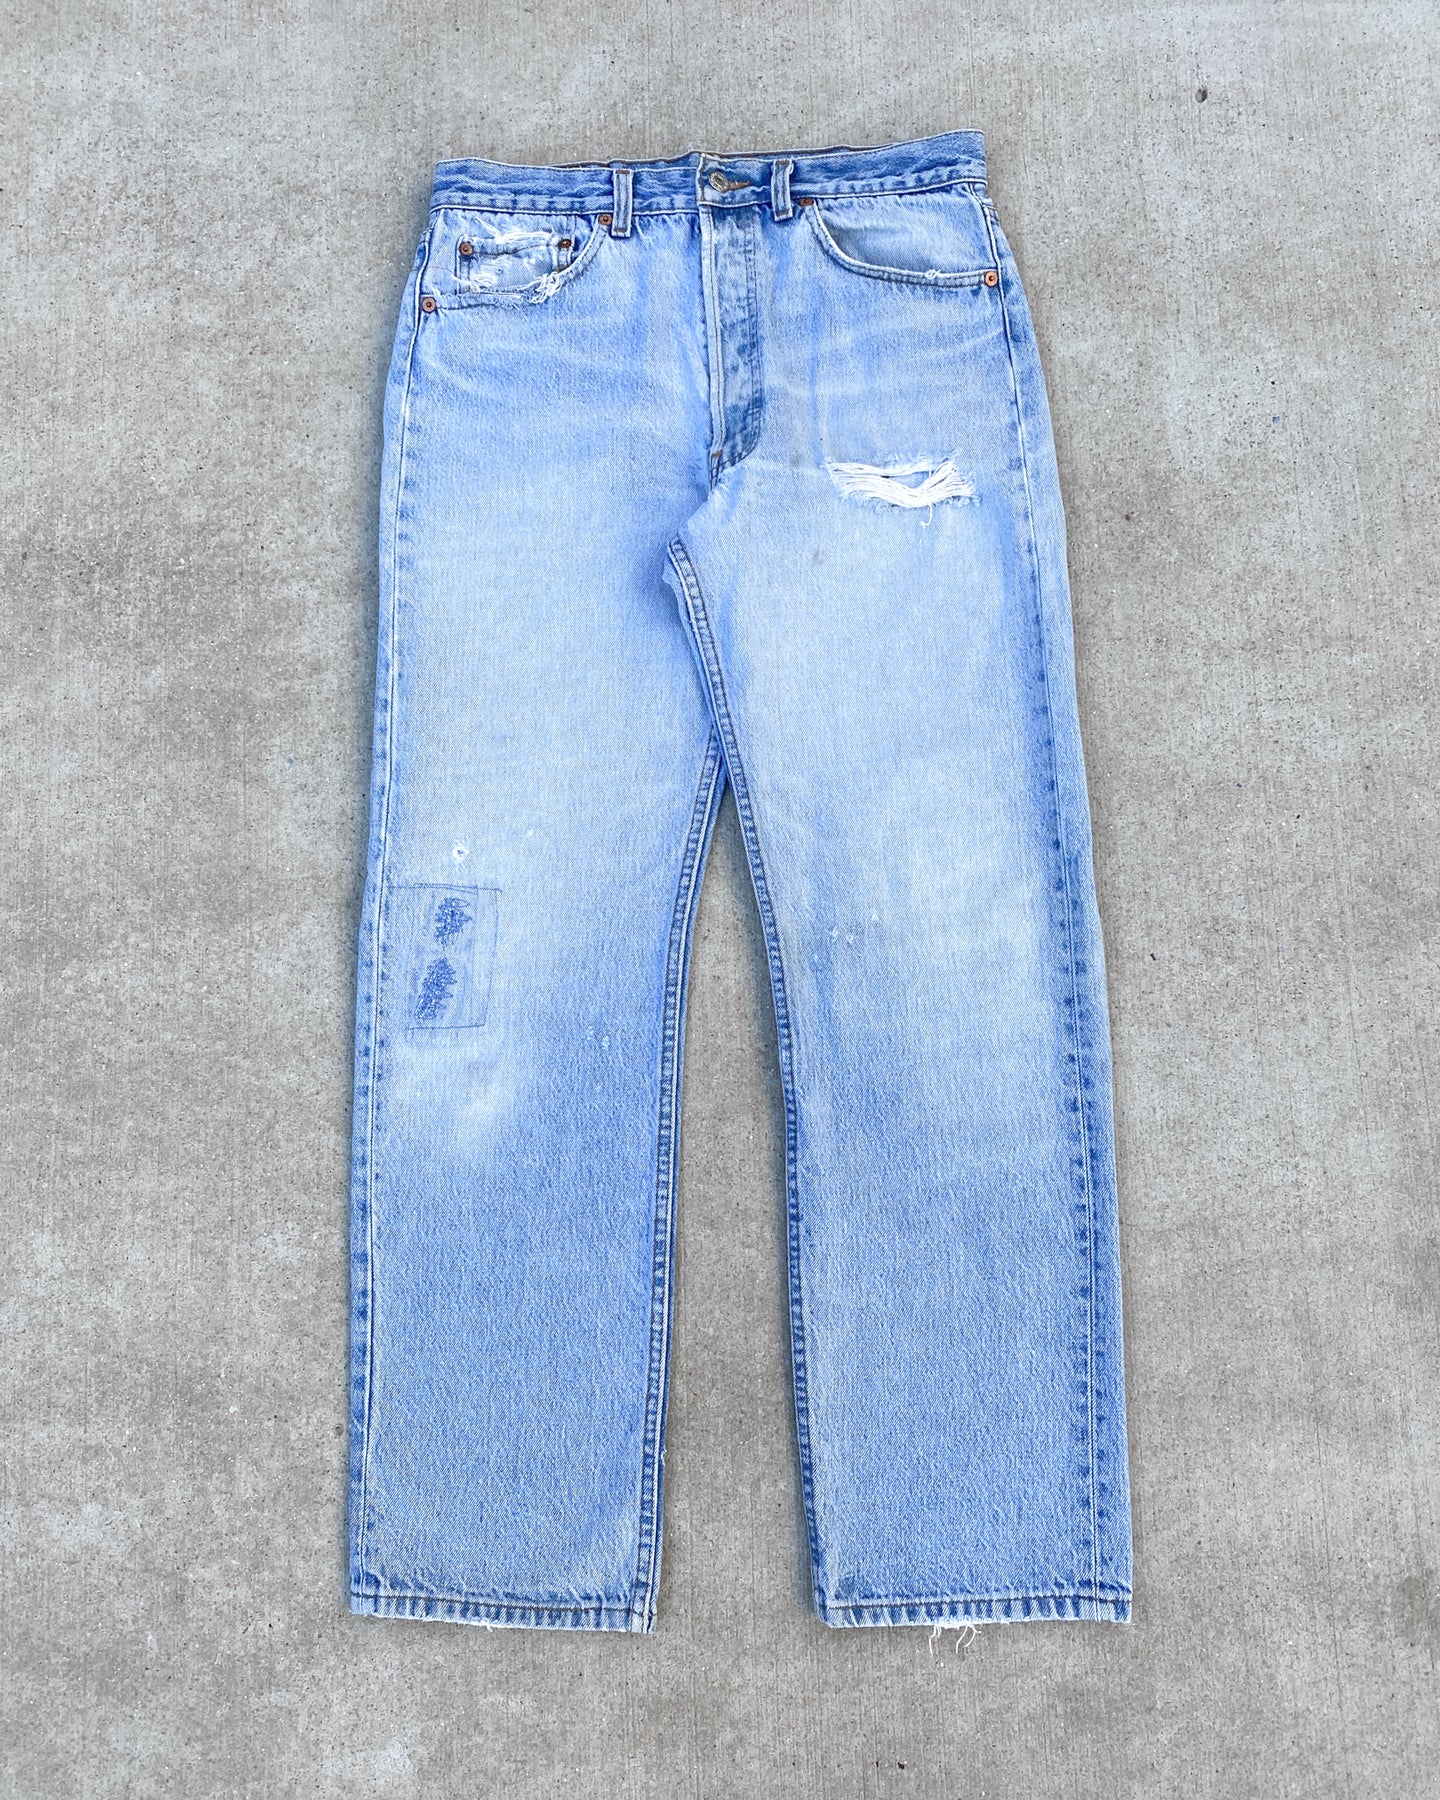 1990s Levi's Repaired and Distressed Light Wash 501 - Size 31 x 30